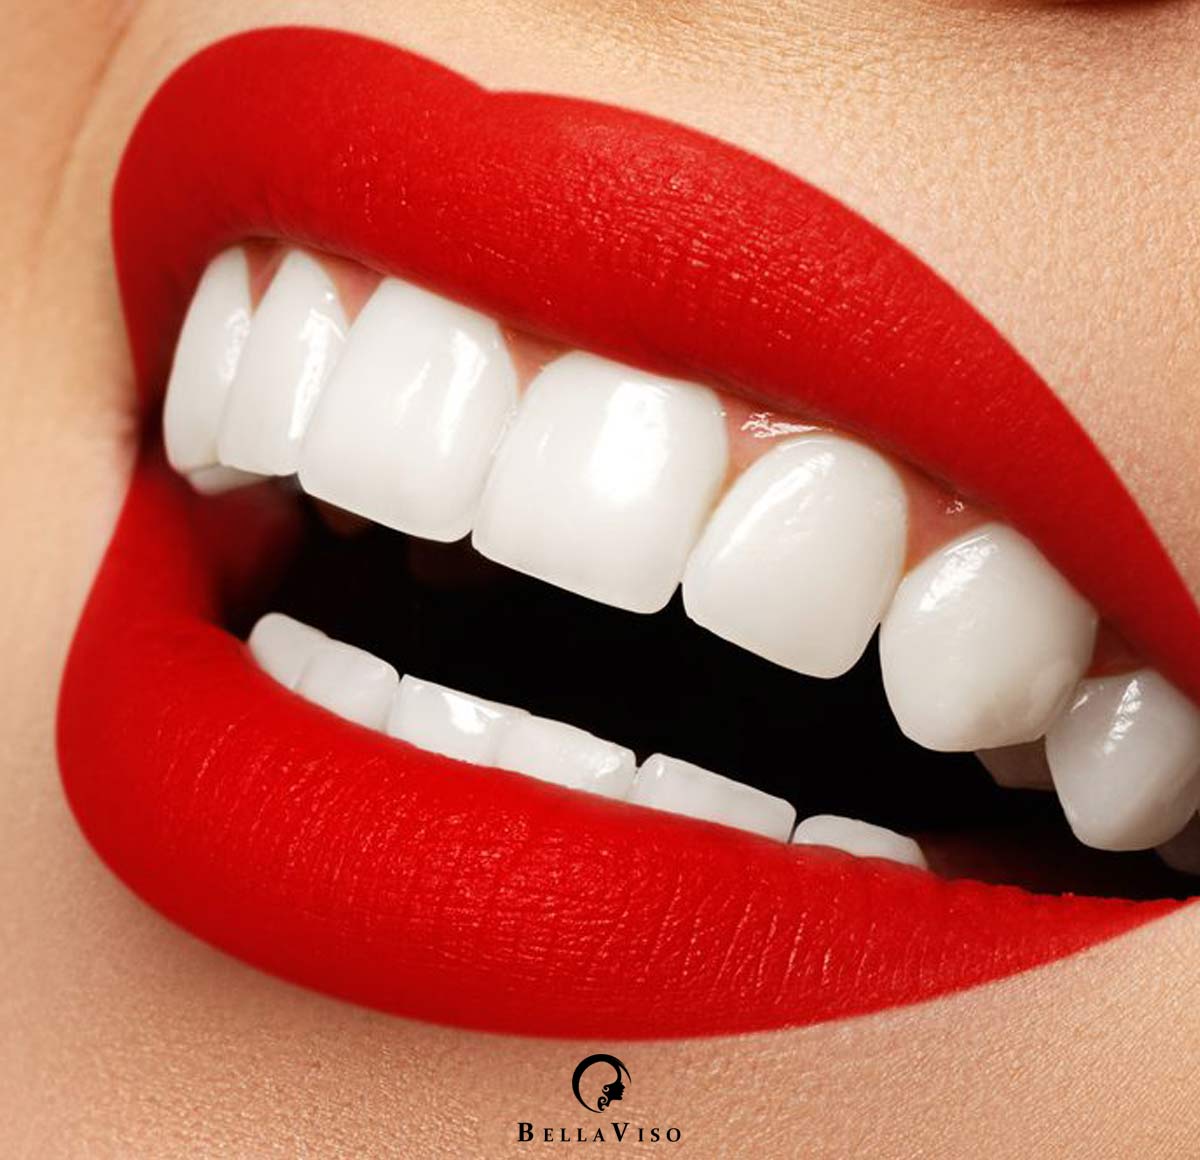 Porcelain Veneers Cost in Dubai: Enhance Your Smile with Affordable Quality